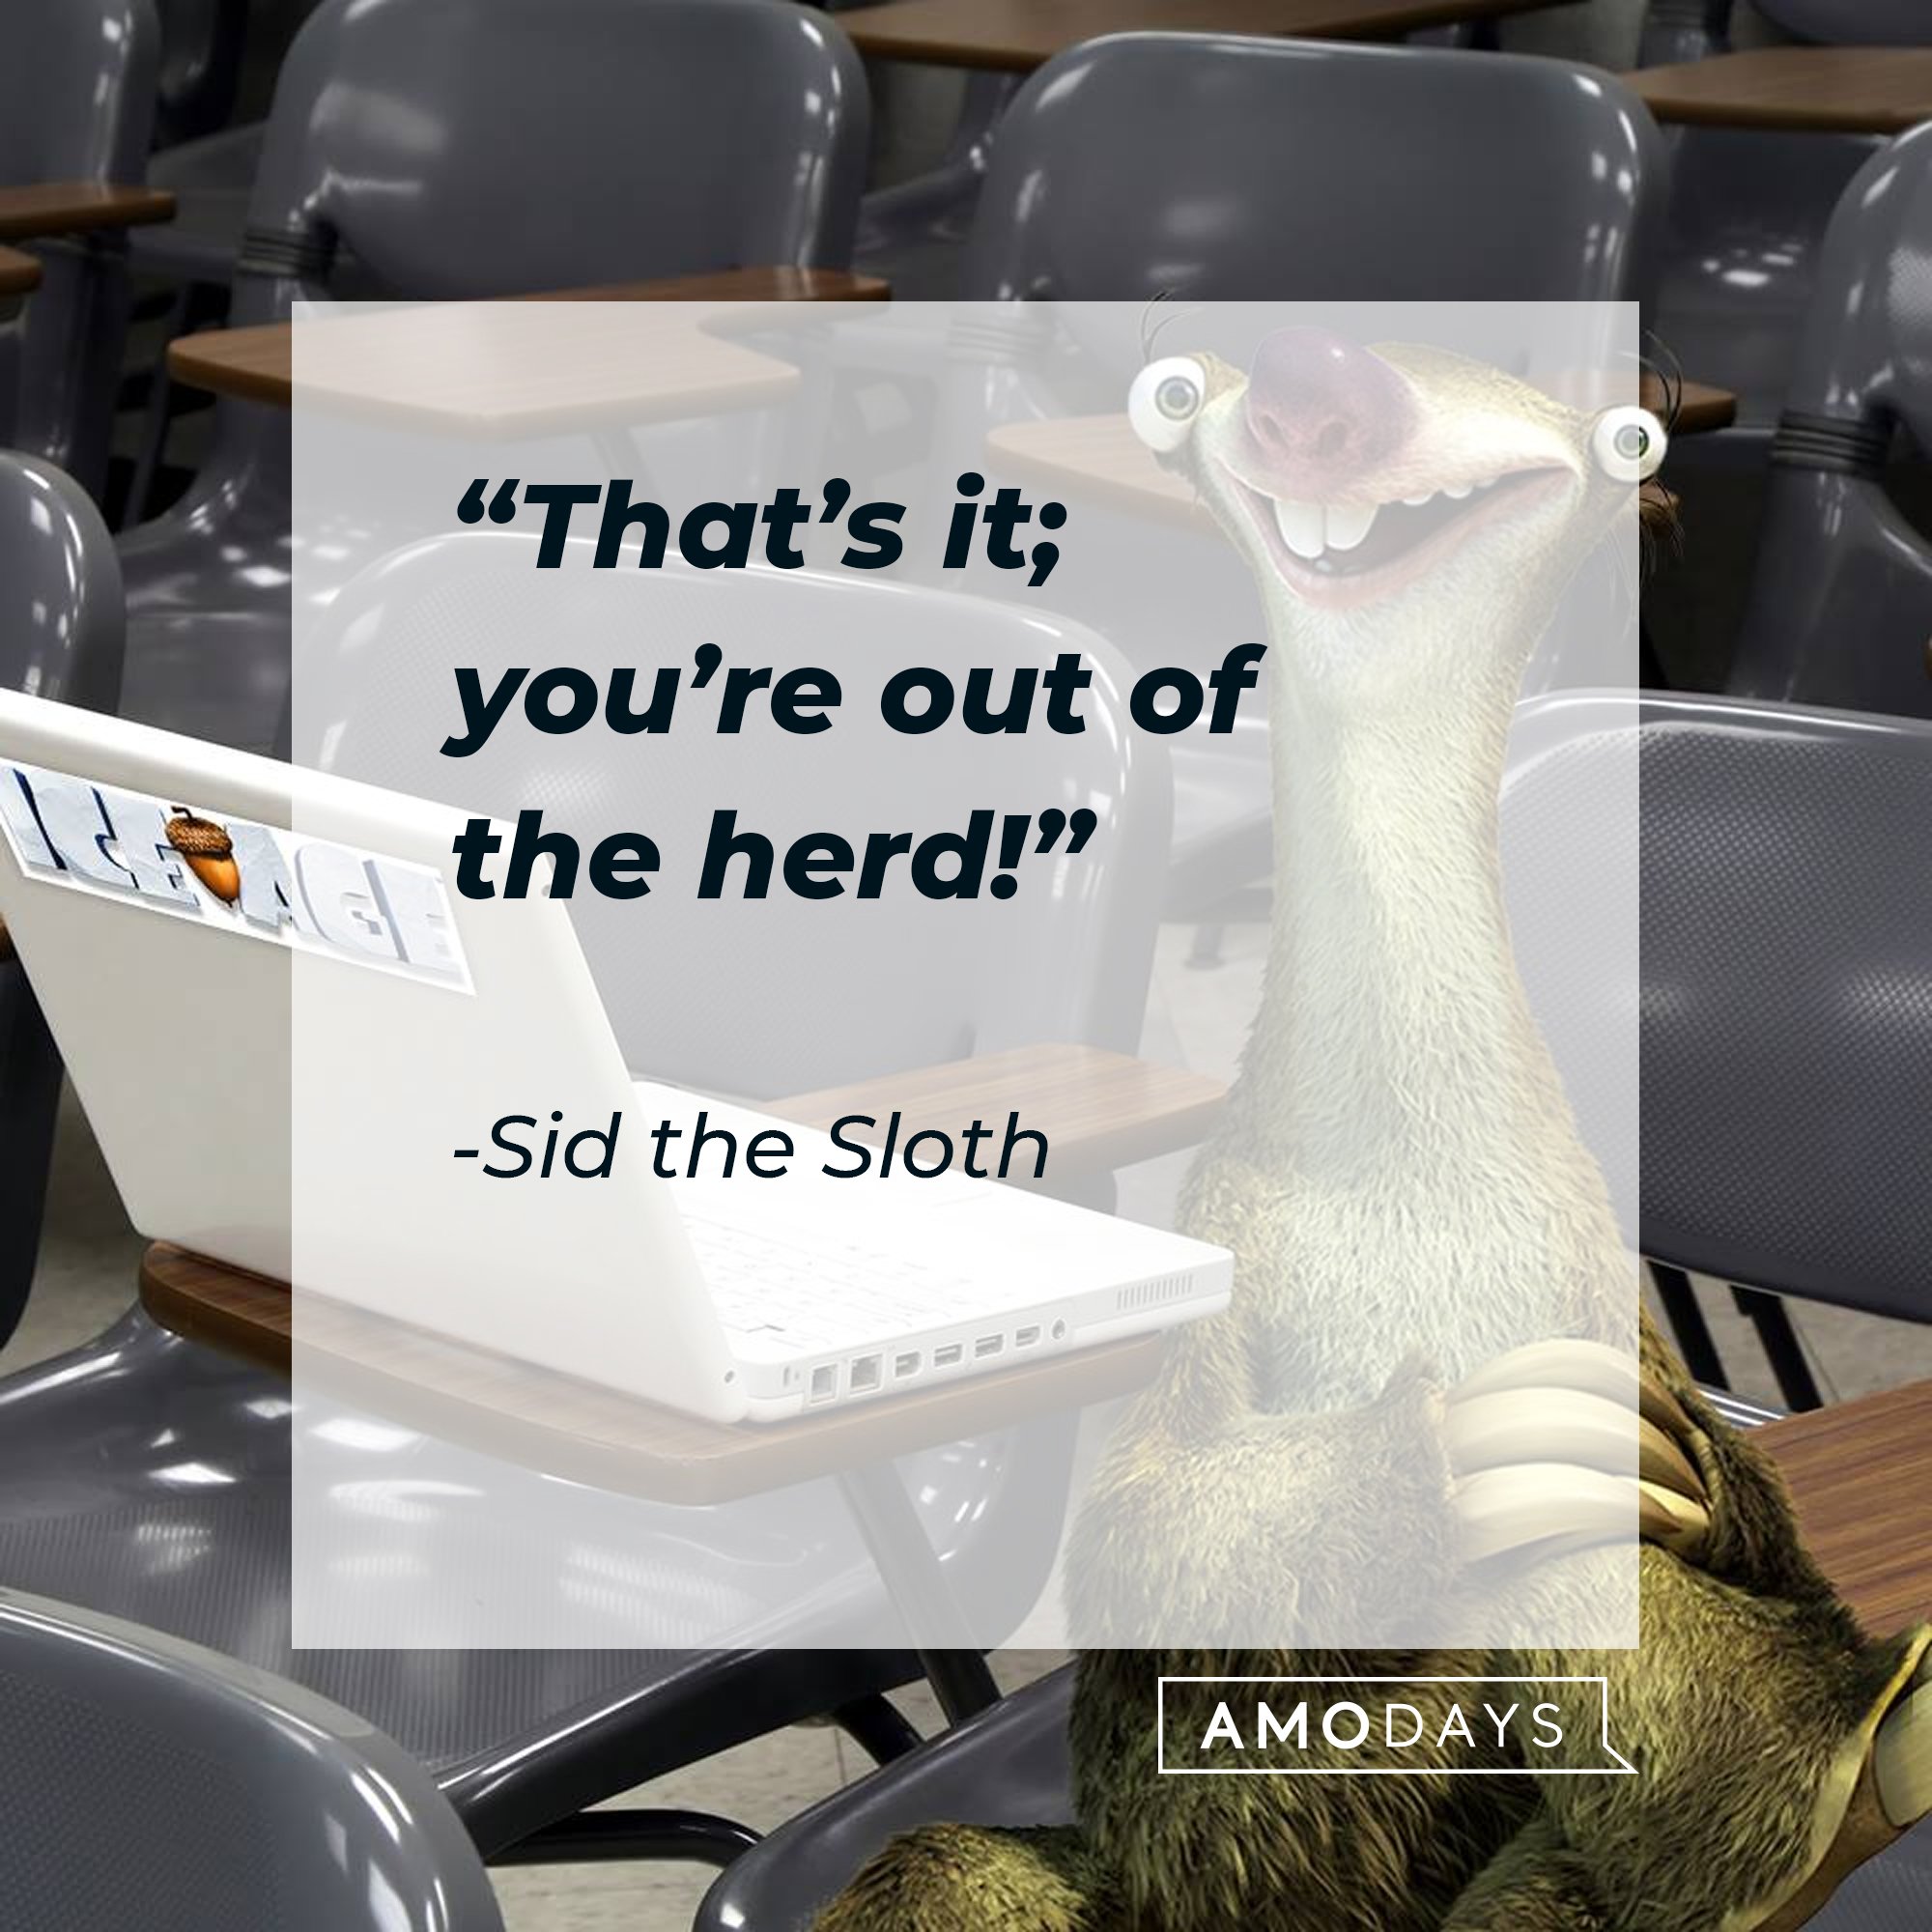 Sid the Sloth's quote: “That’s it; you’re out of the herd!” | Image: AmoDays